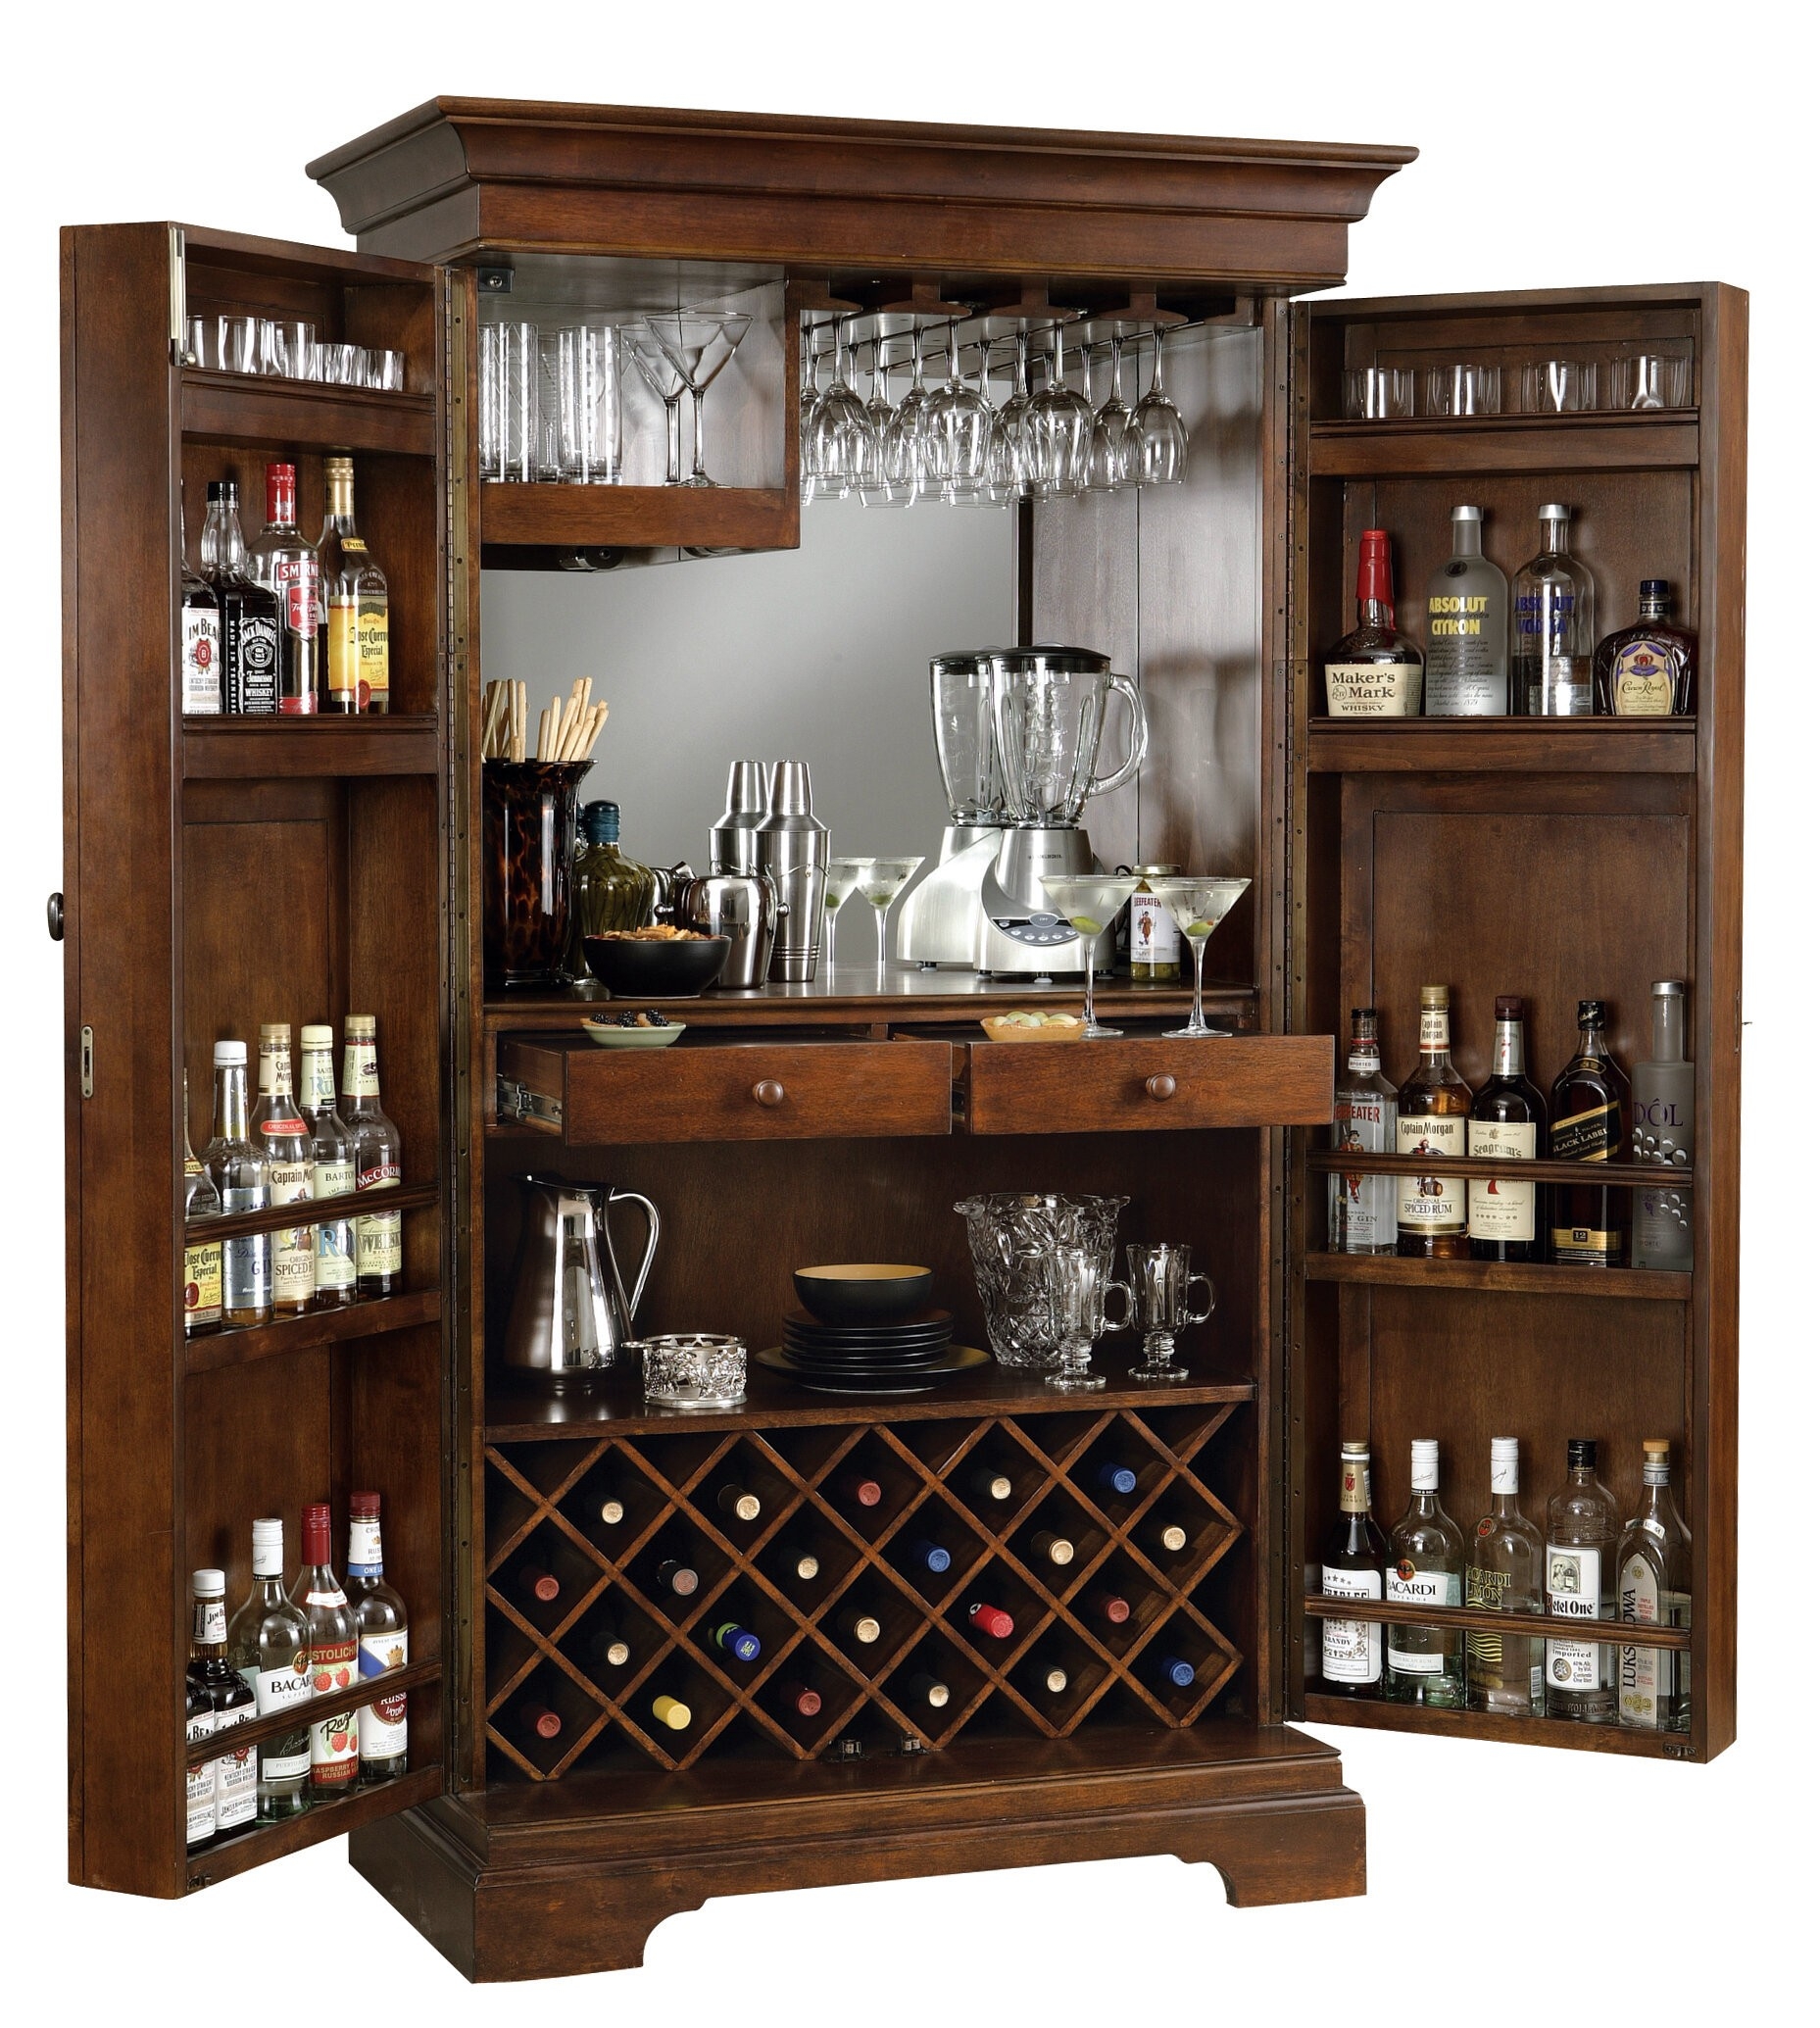 armoire turned into bar storage- yeah this is a necessity in my